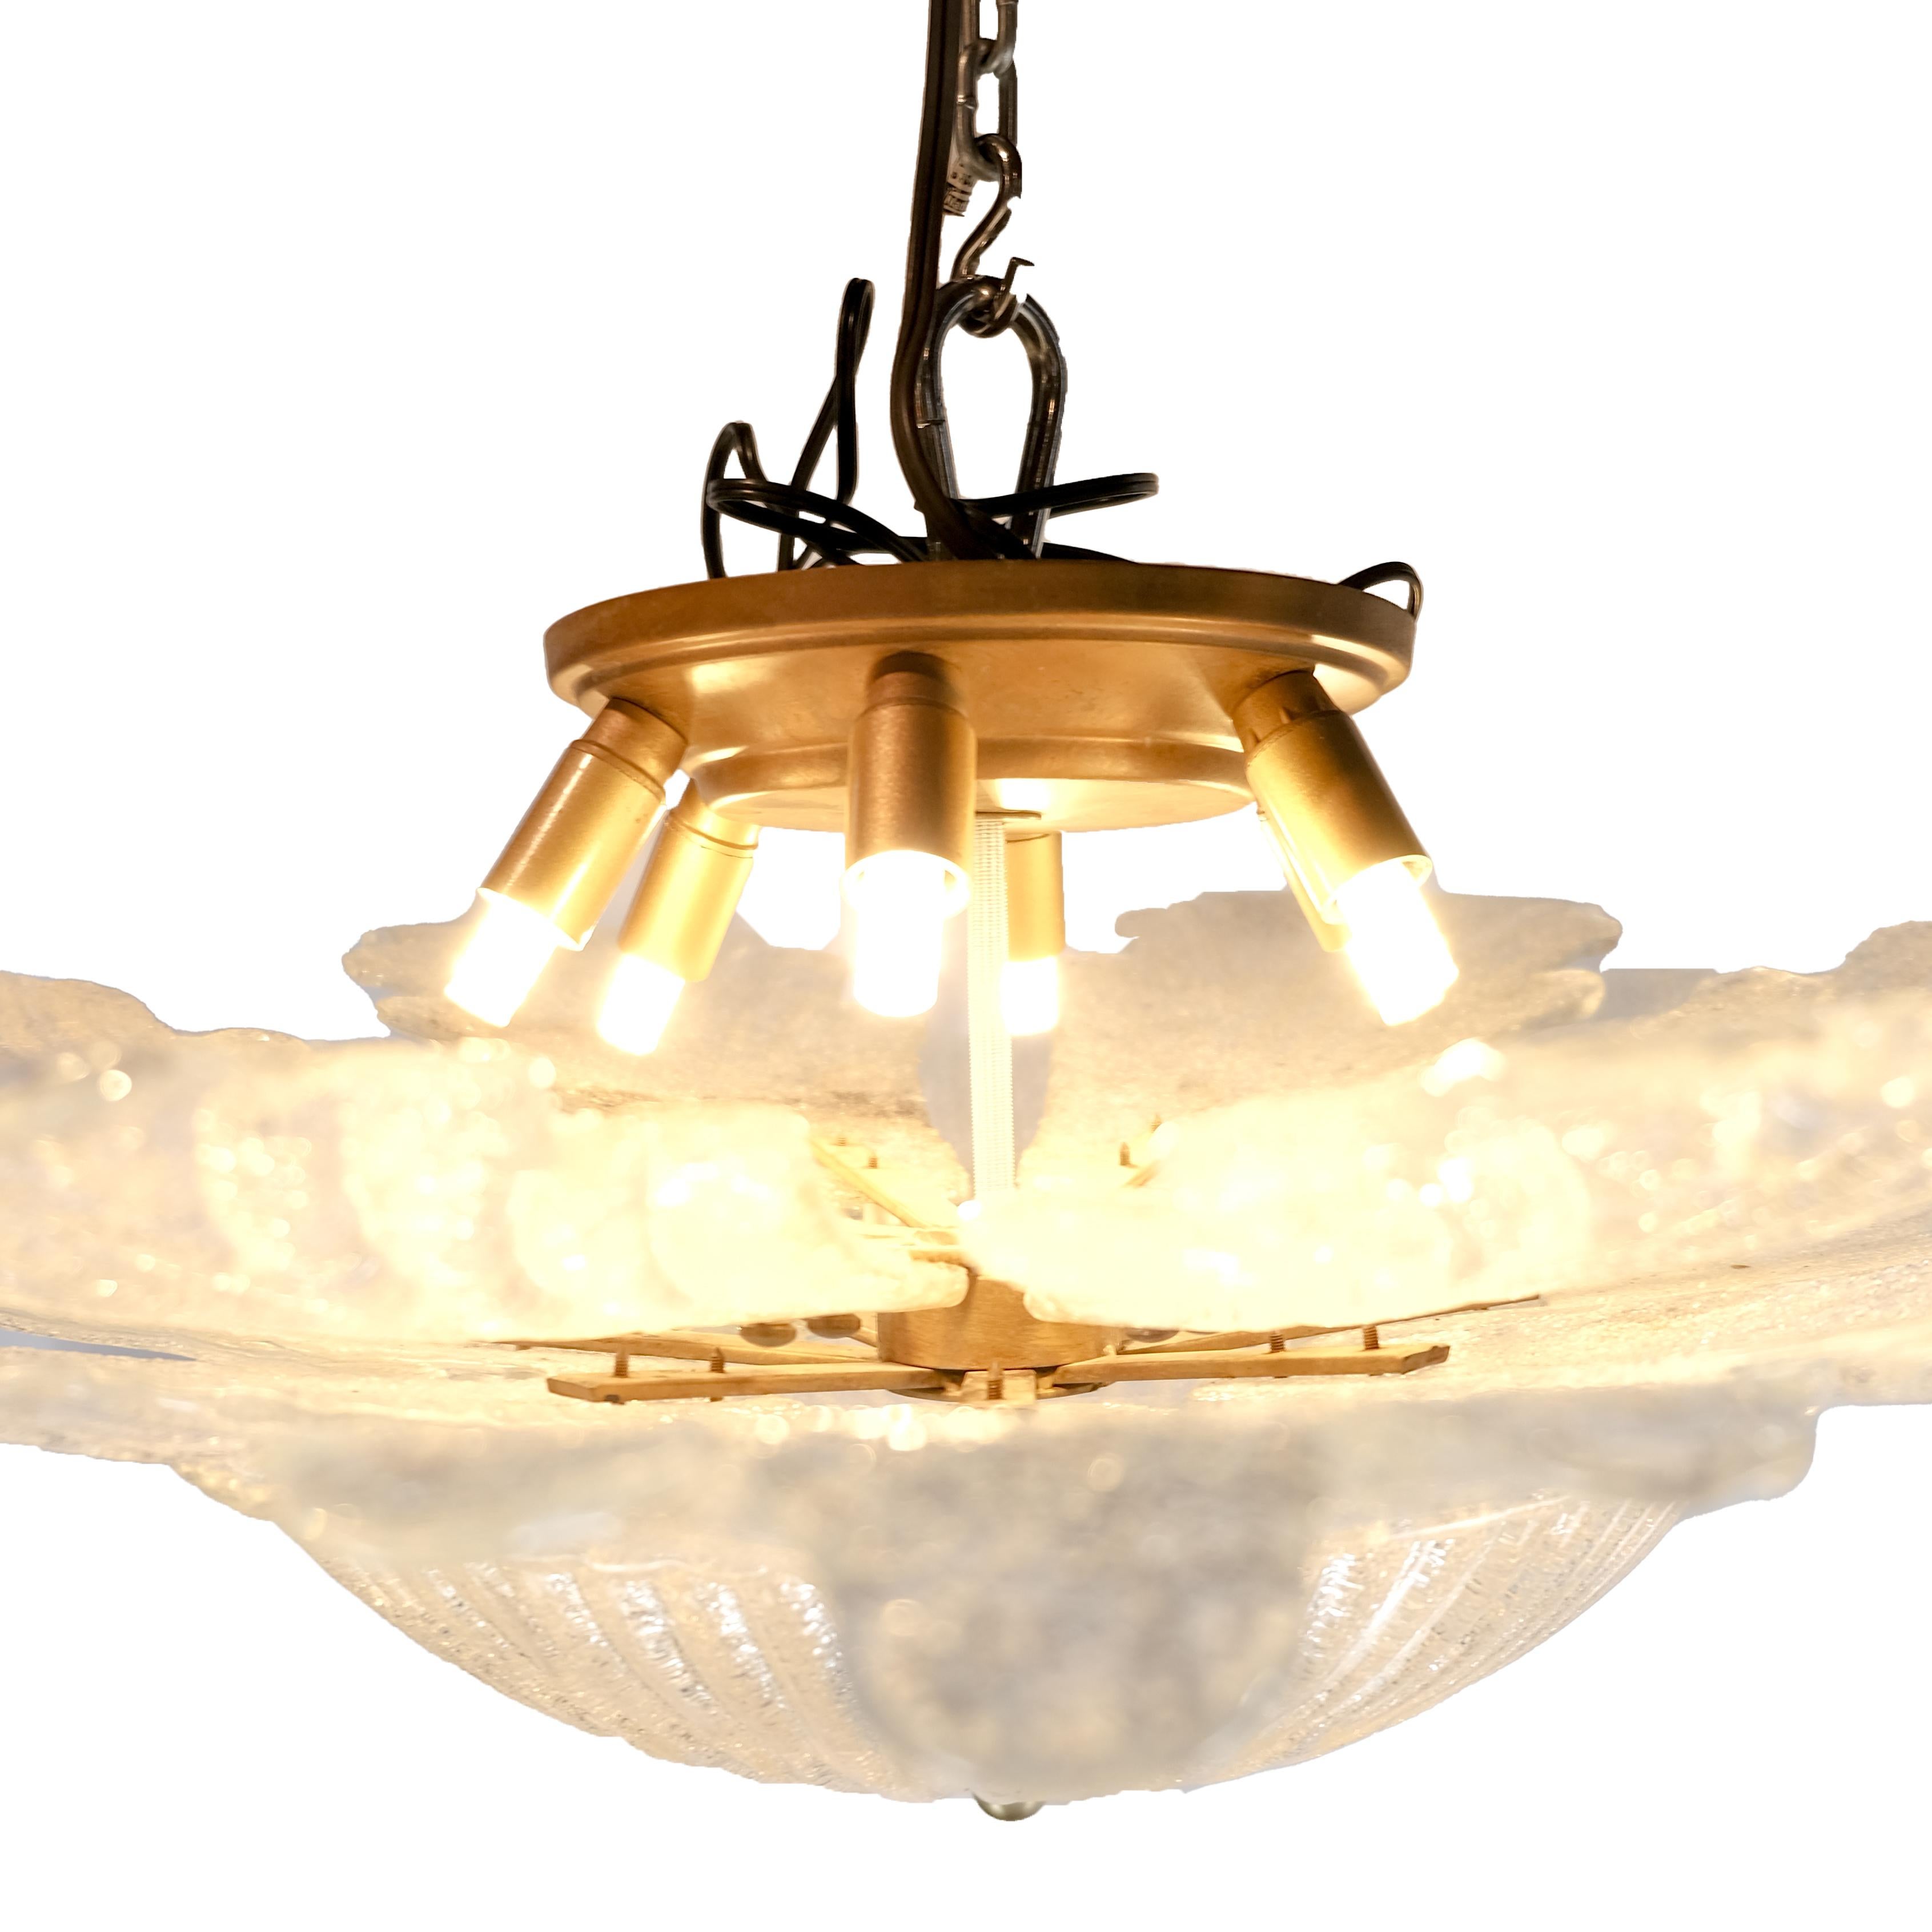 Large statement piece. Mid-Century Modern all glass, large multi leaf, fluted bowl base French chandelier. Glass has a stunning crystalized appearance. Hardwired.
Six LED small lights in small sockets.